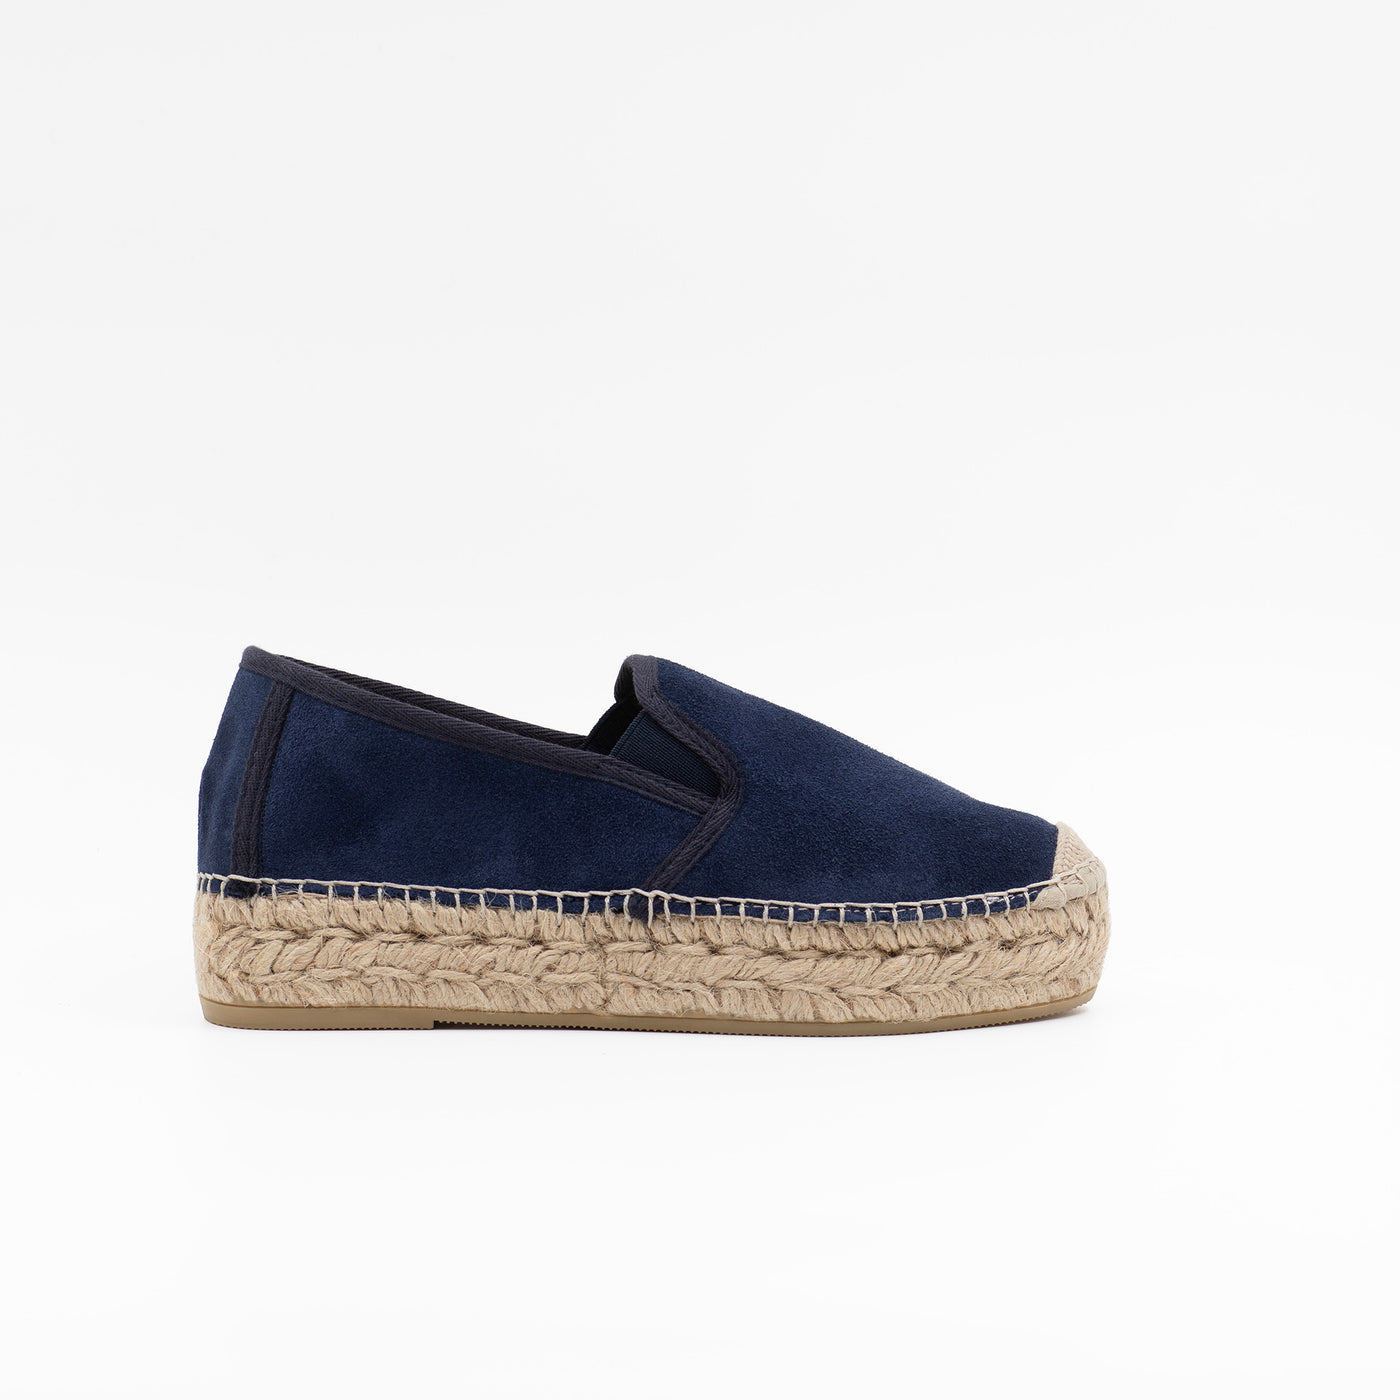 Espadrille in navy suede with chunky sole